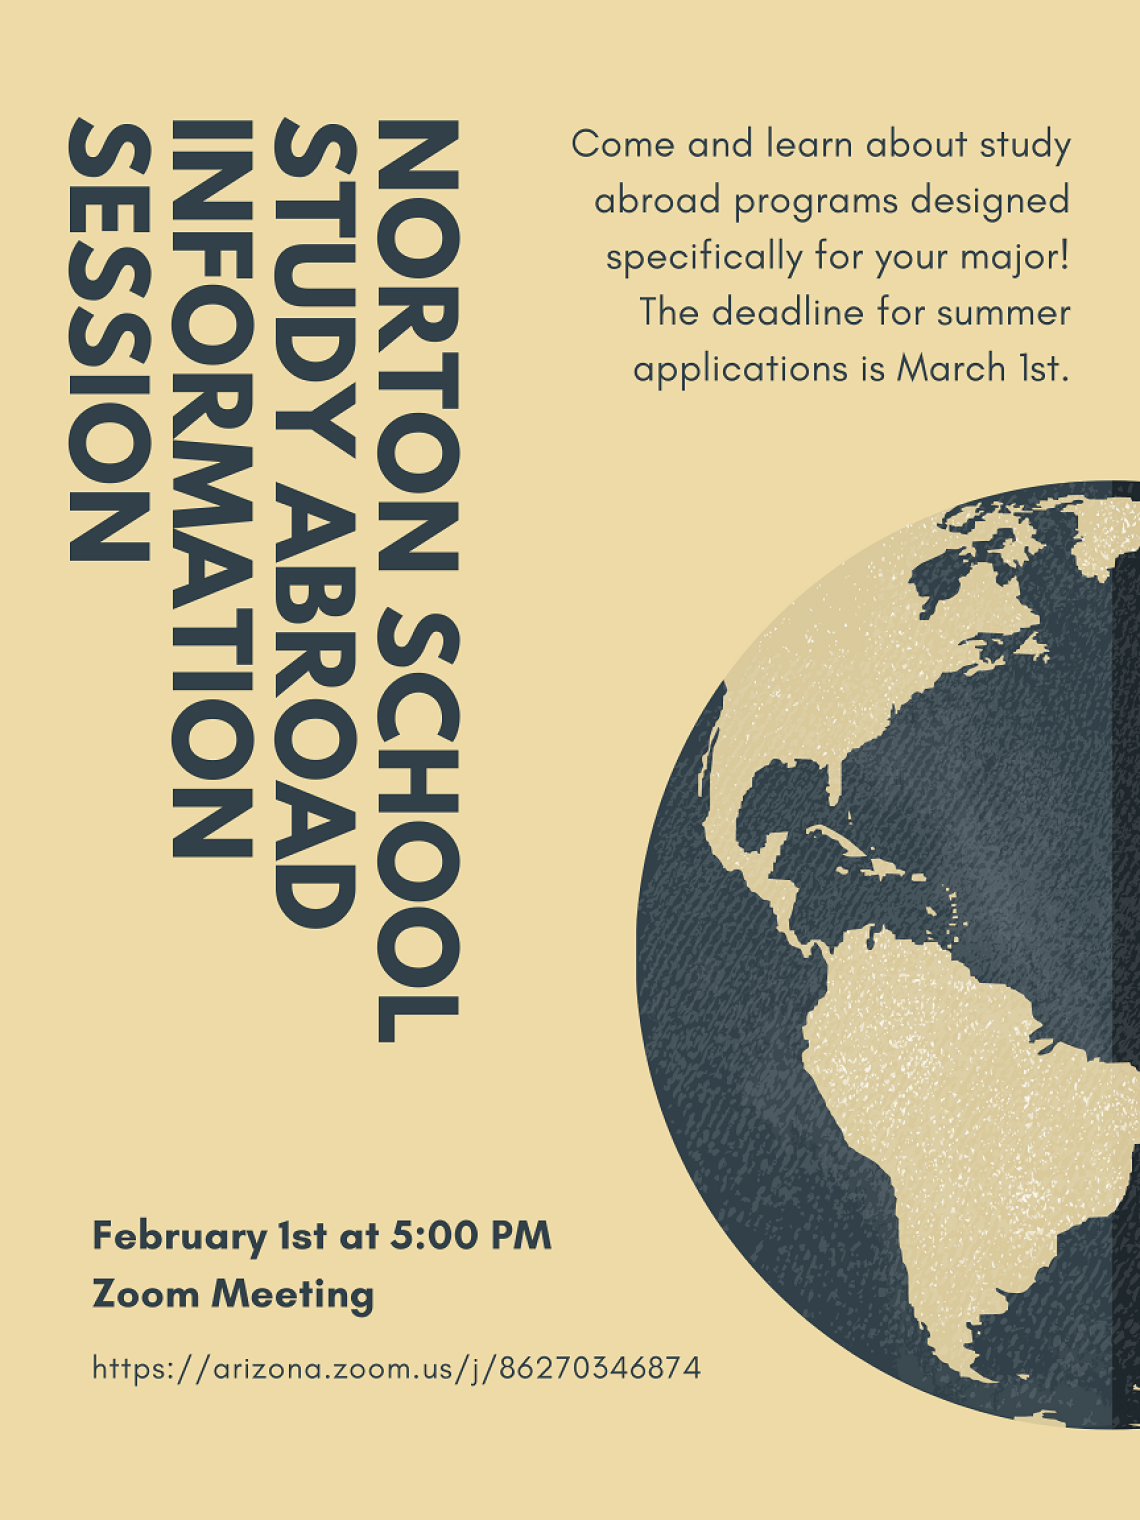 Come and learn about study abroad programs designed specifically for your major!